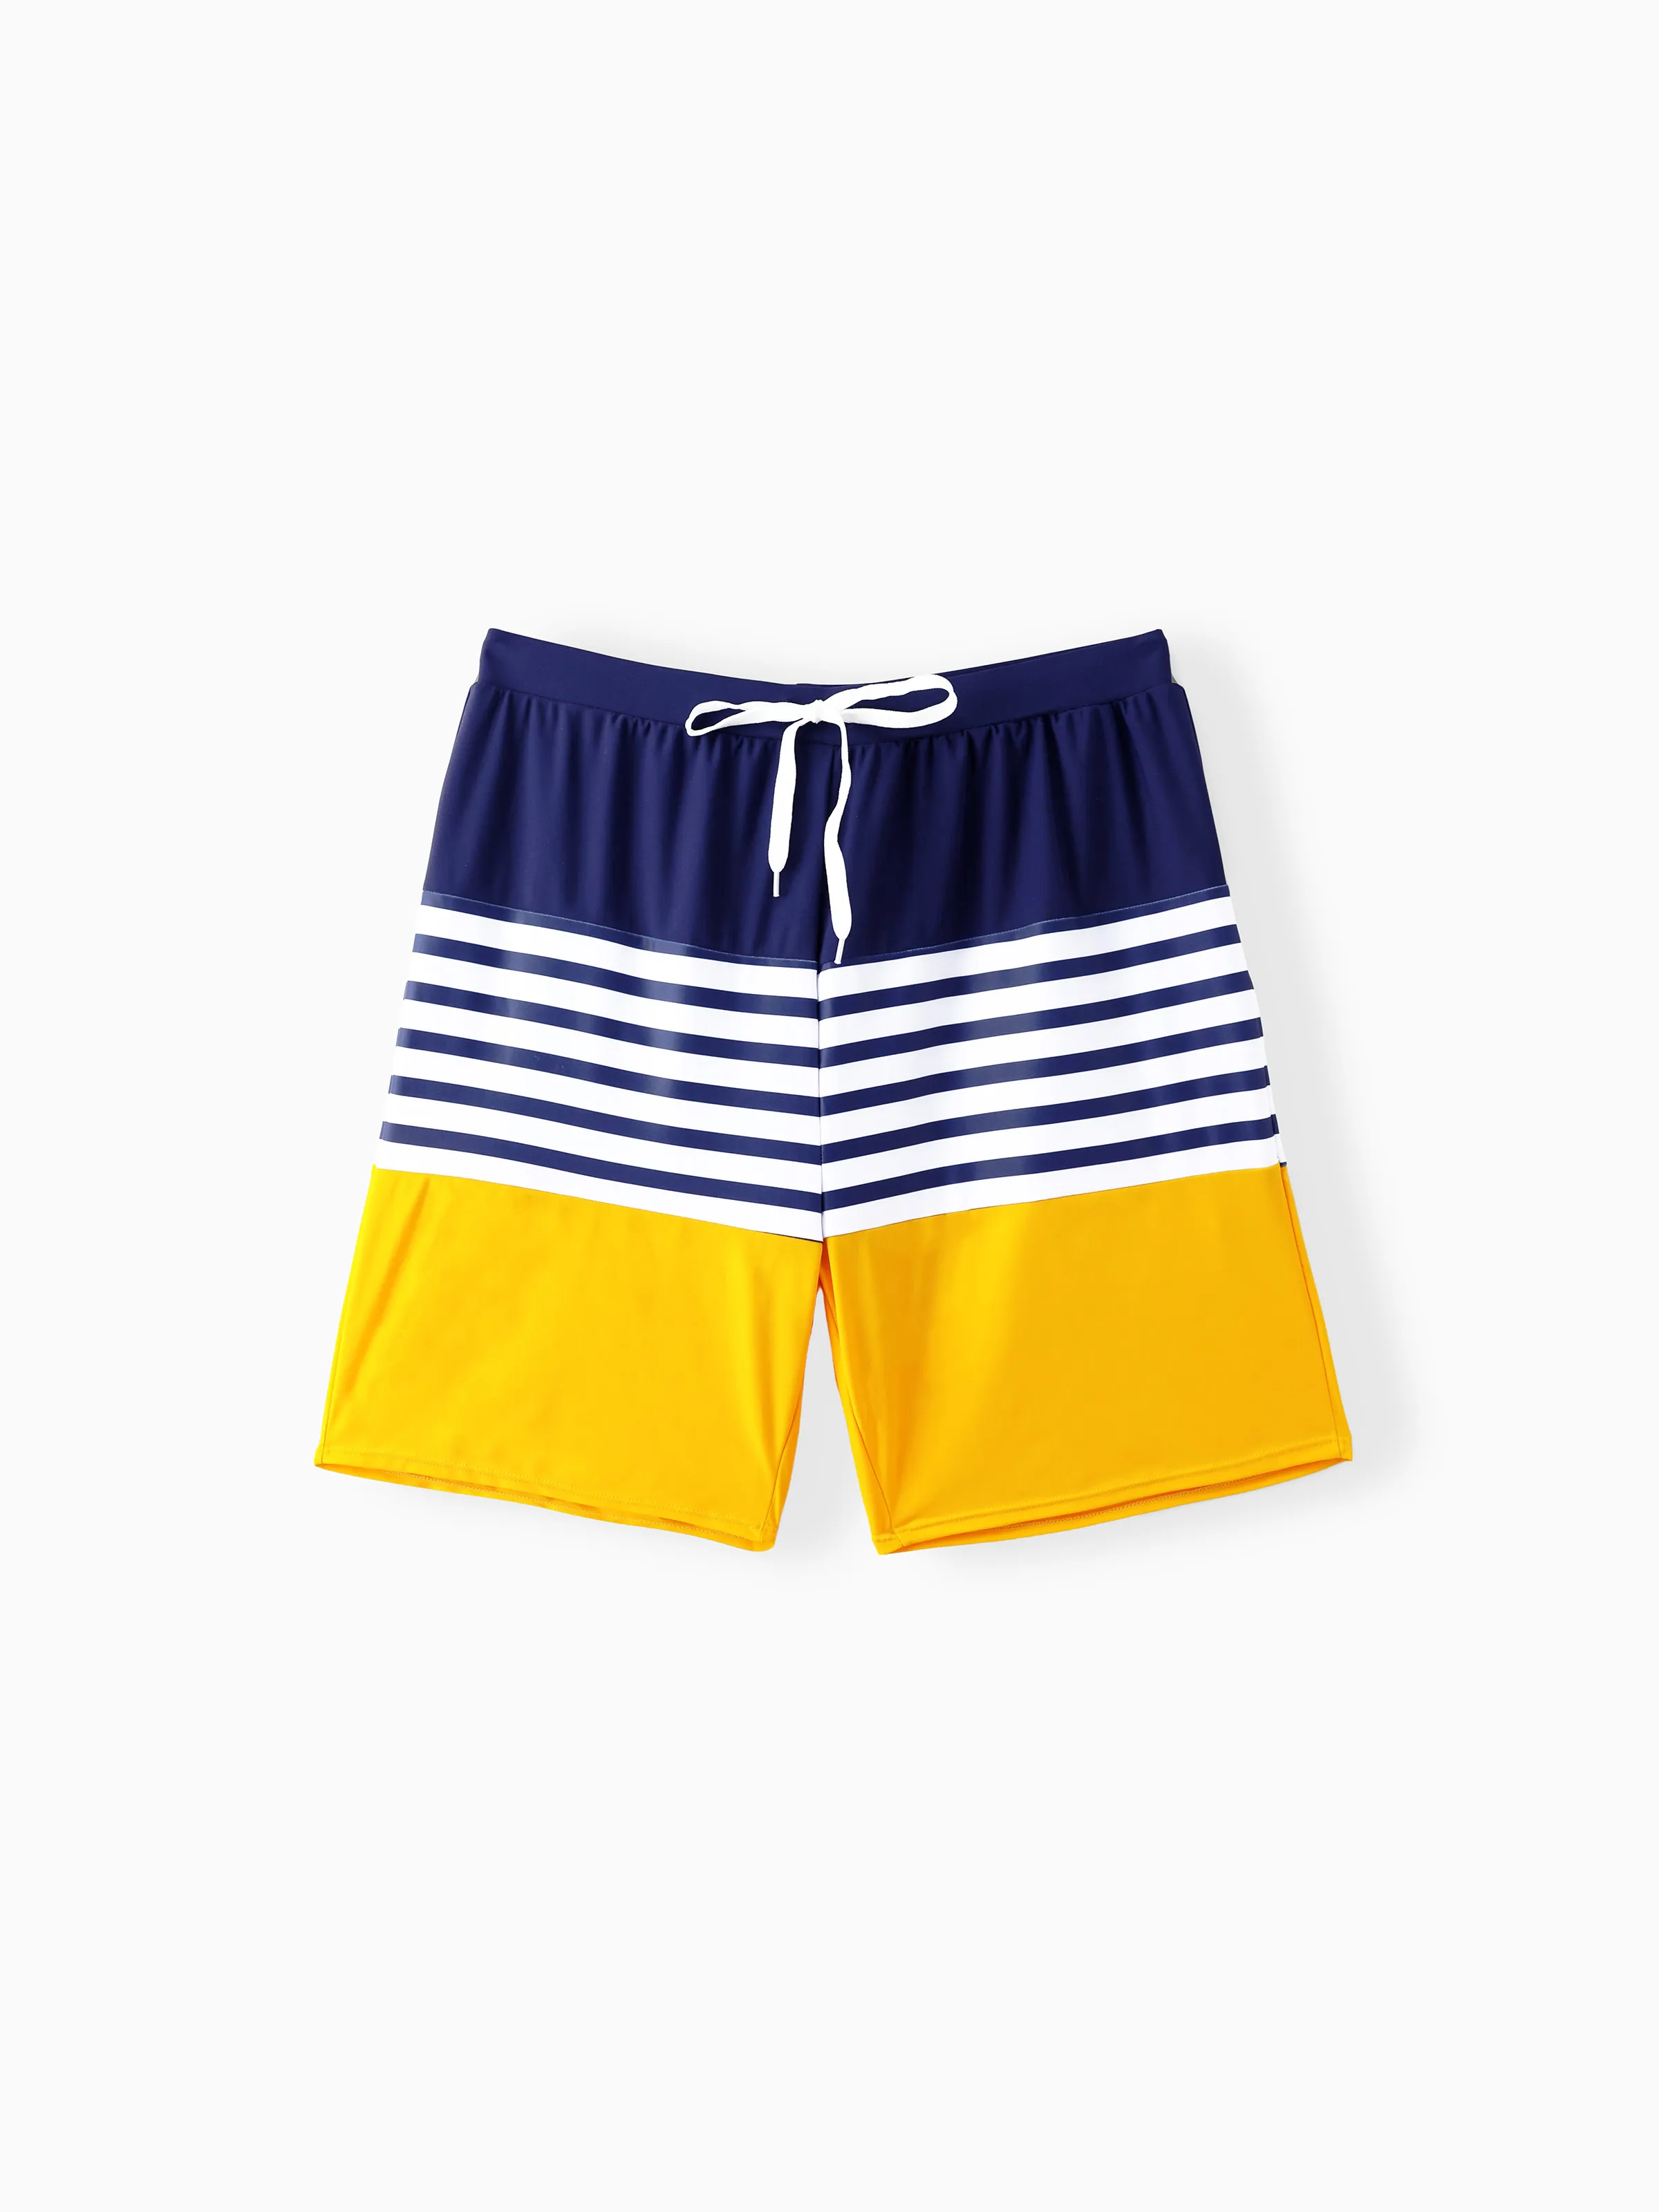 

Family Matching Stripe & Colorblock Spliced One Piece Swimsuit or Swim Trunks Shorts